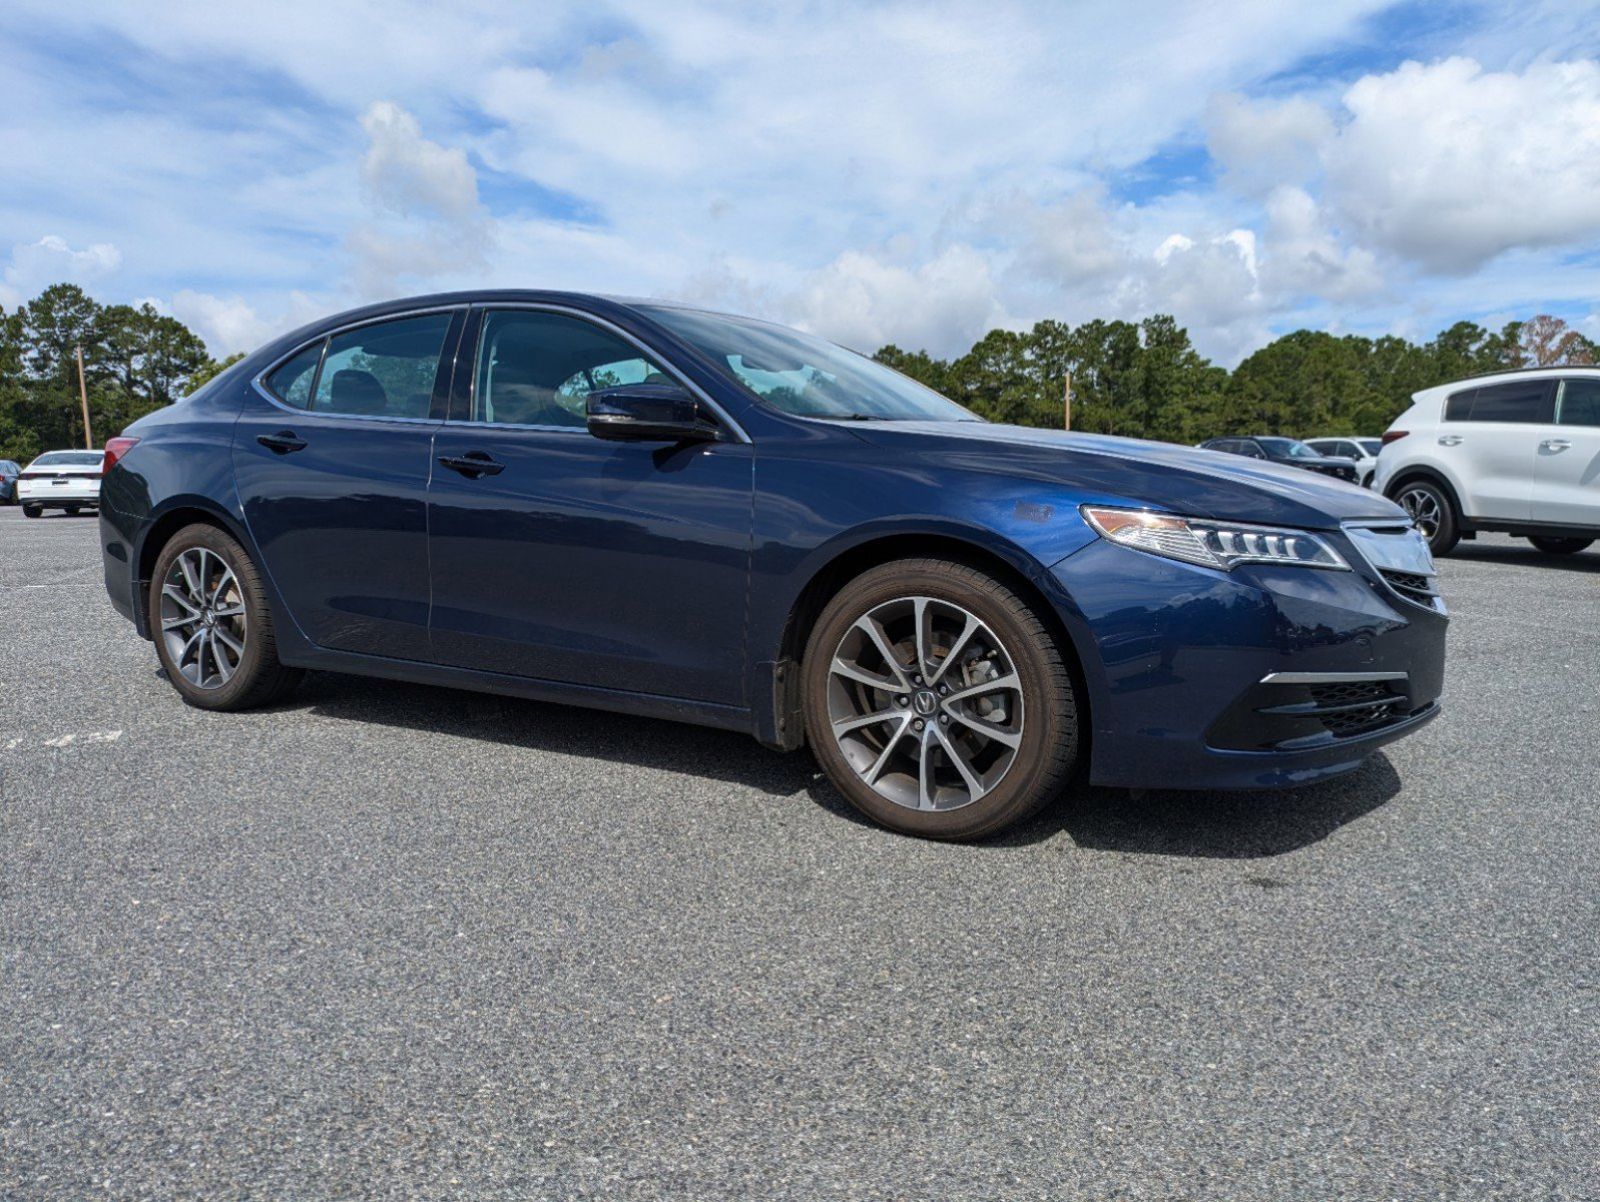 Used, 2016 Acura Tlx V6, Blue, H16234A-2